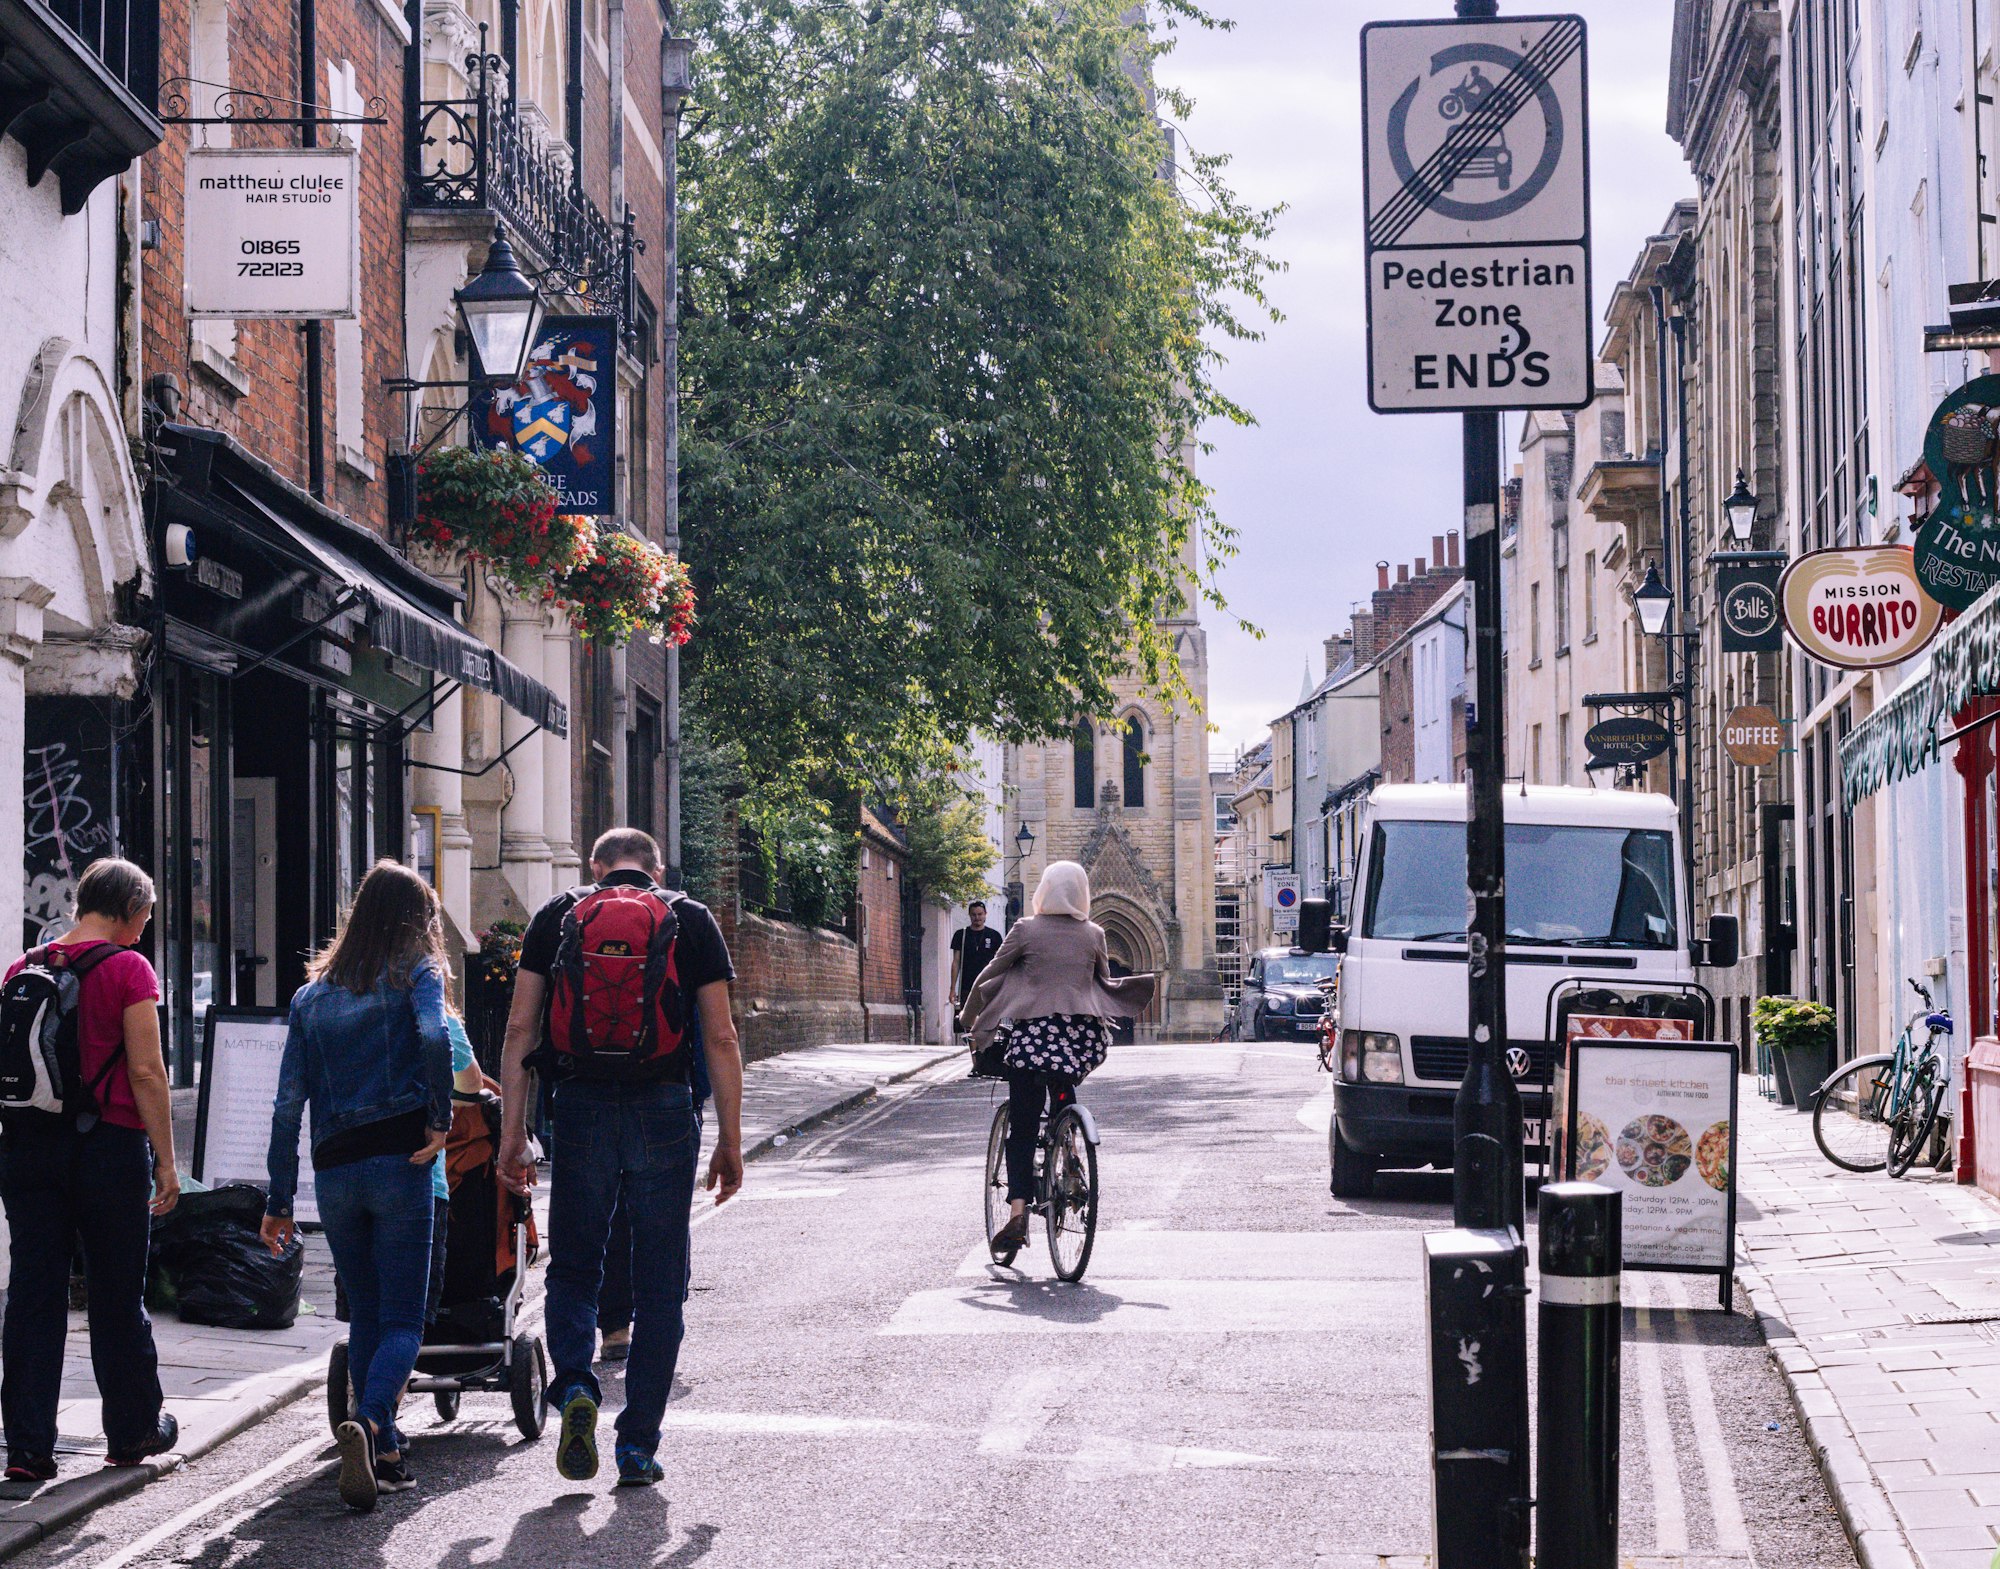 The 20 Minute Neighbourhood: A vision for a better pedal-powered future